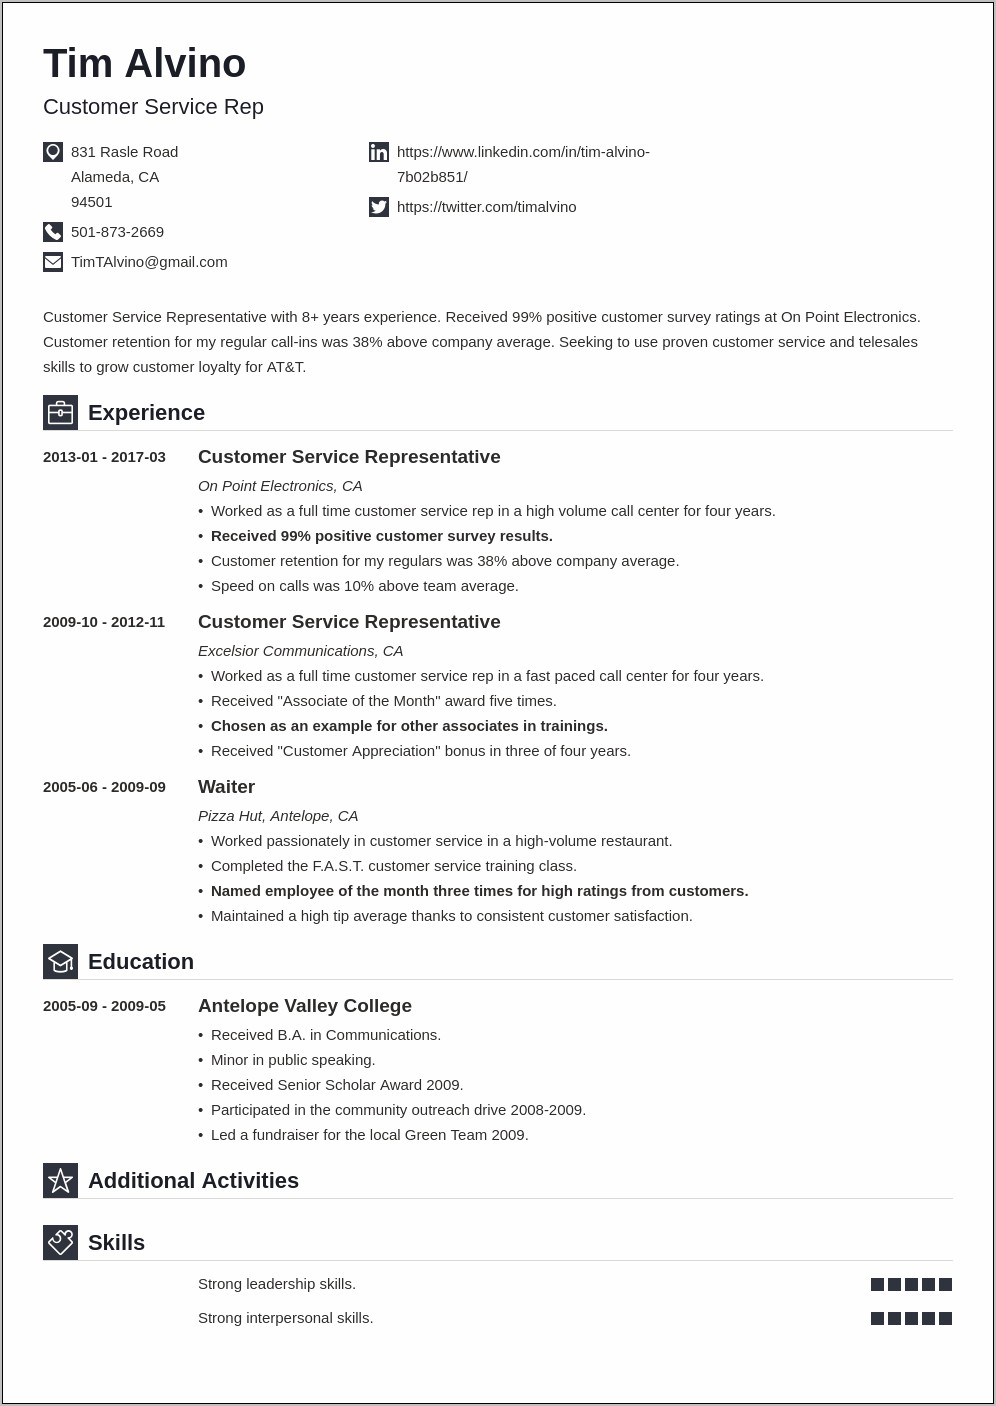 Student Resume Objective Examples For Call Center